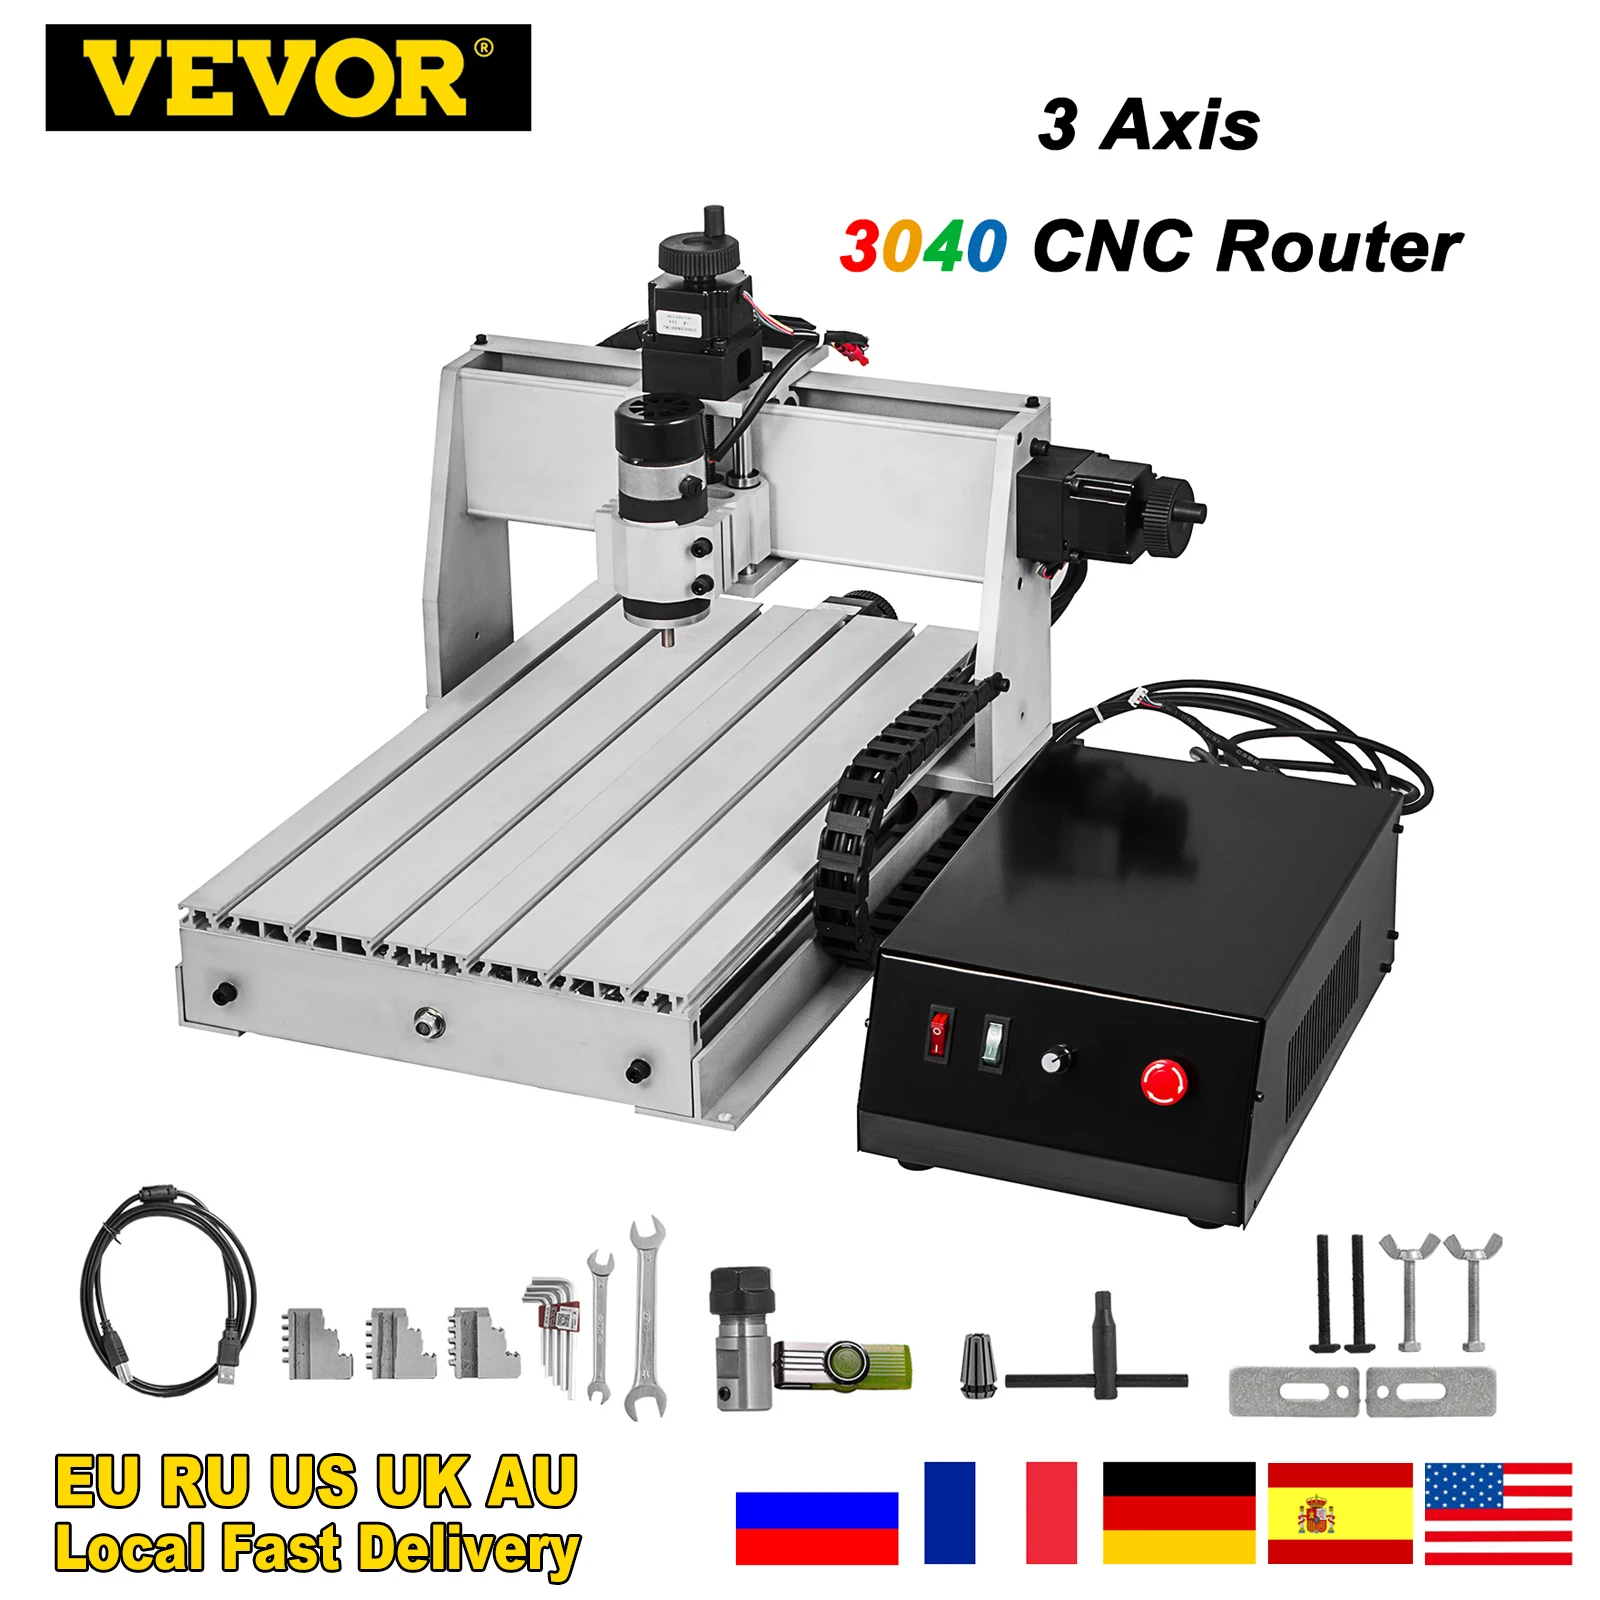 

VEVOR 3/4 Axis 3040 CNC Router Engraver USB Port ER11 500W Cutter Engraving Milling Machine for Woodworking Machinery DIY Craft